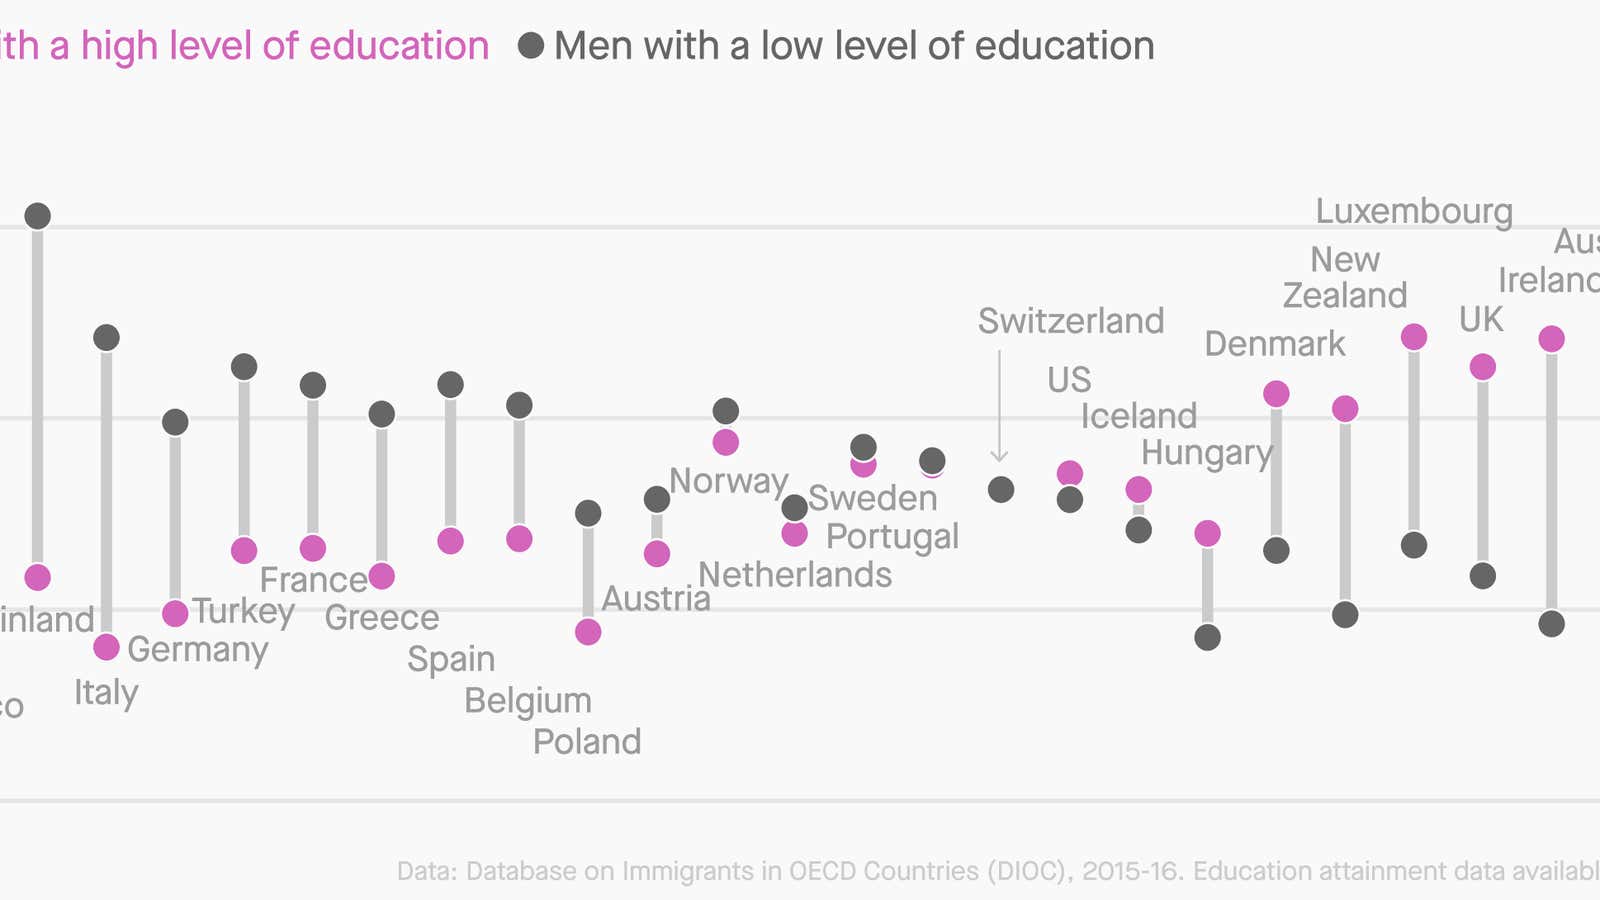 Highly-educated immigrant women outnumbered poorly-educated immigrant men in OECD countries in 2016.